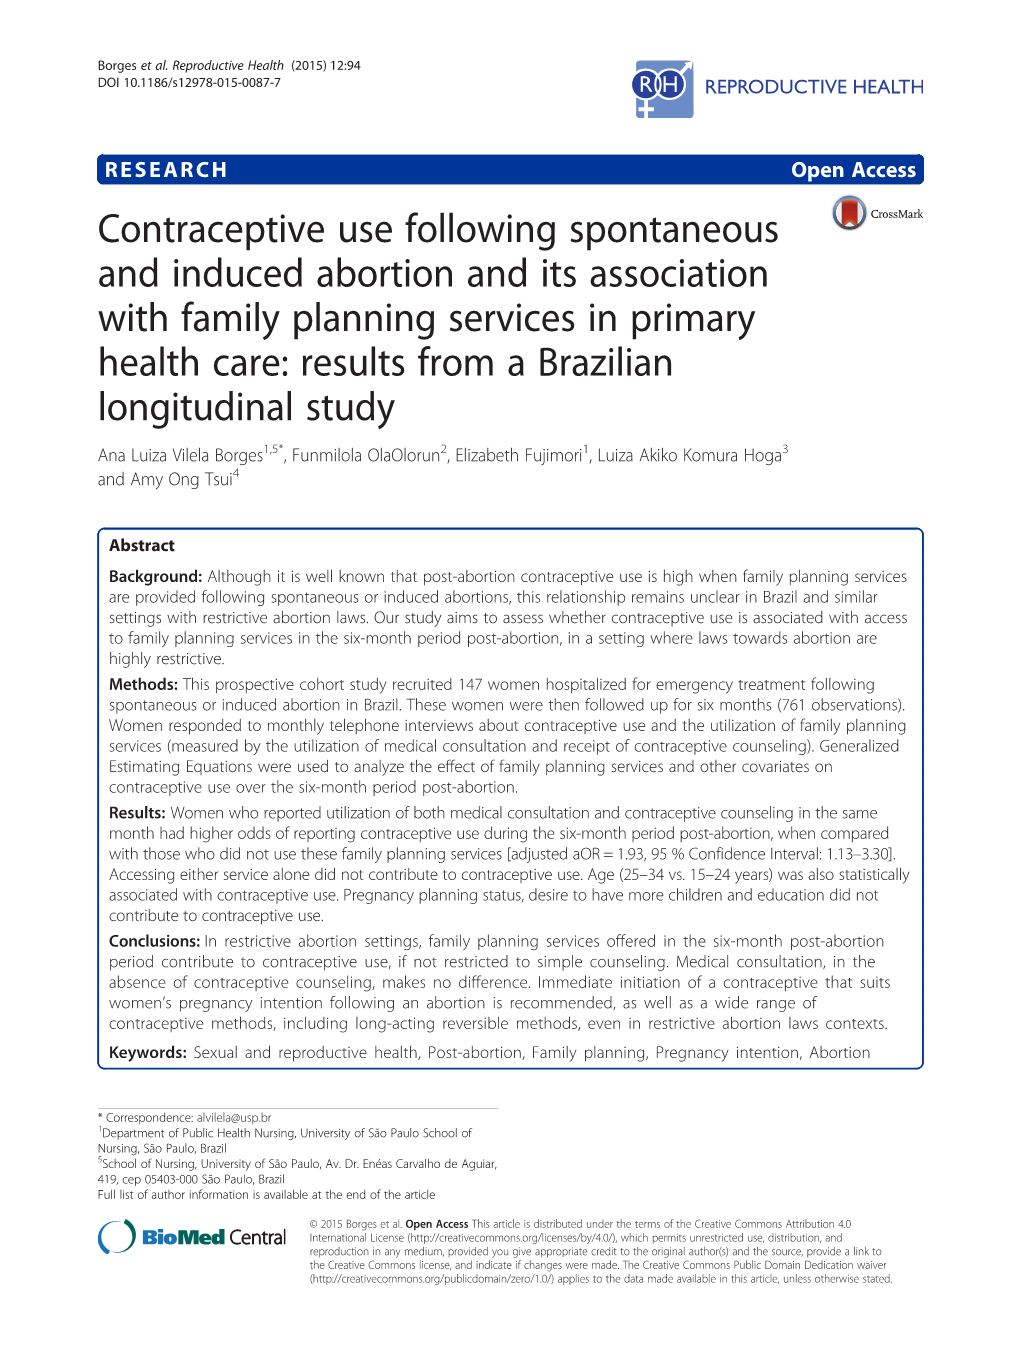 Contraceptive Use Following Spontaneous and Induced Abortion and Its Association with Family Planning Services in Primary Health